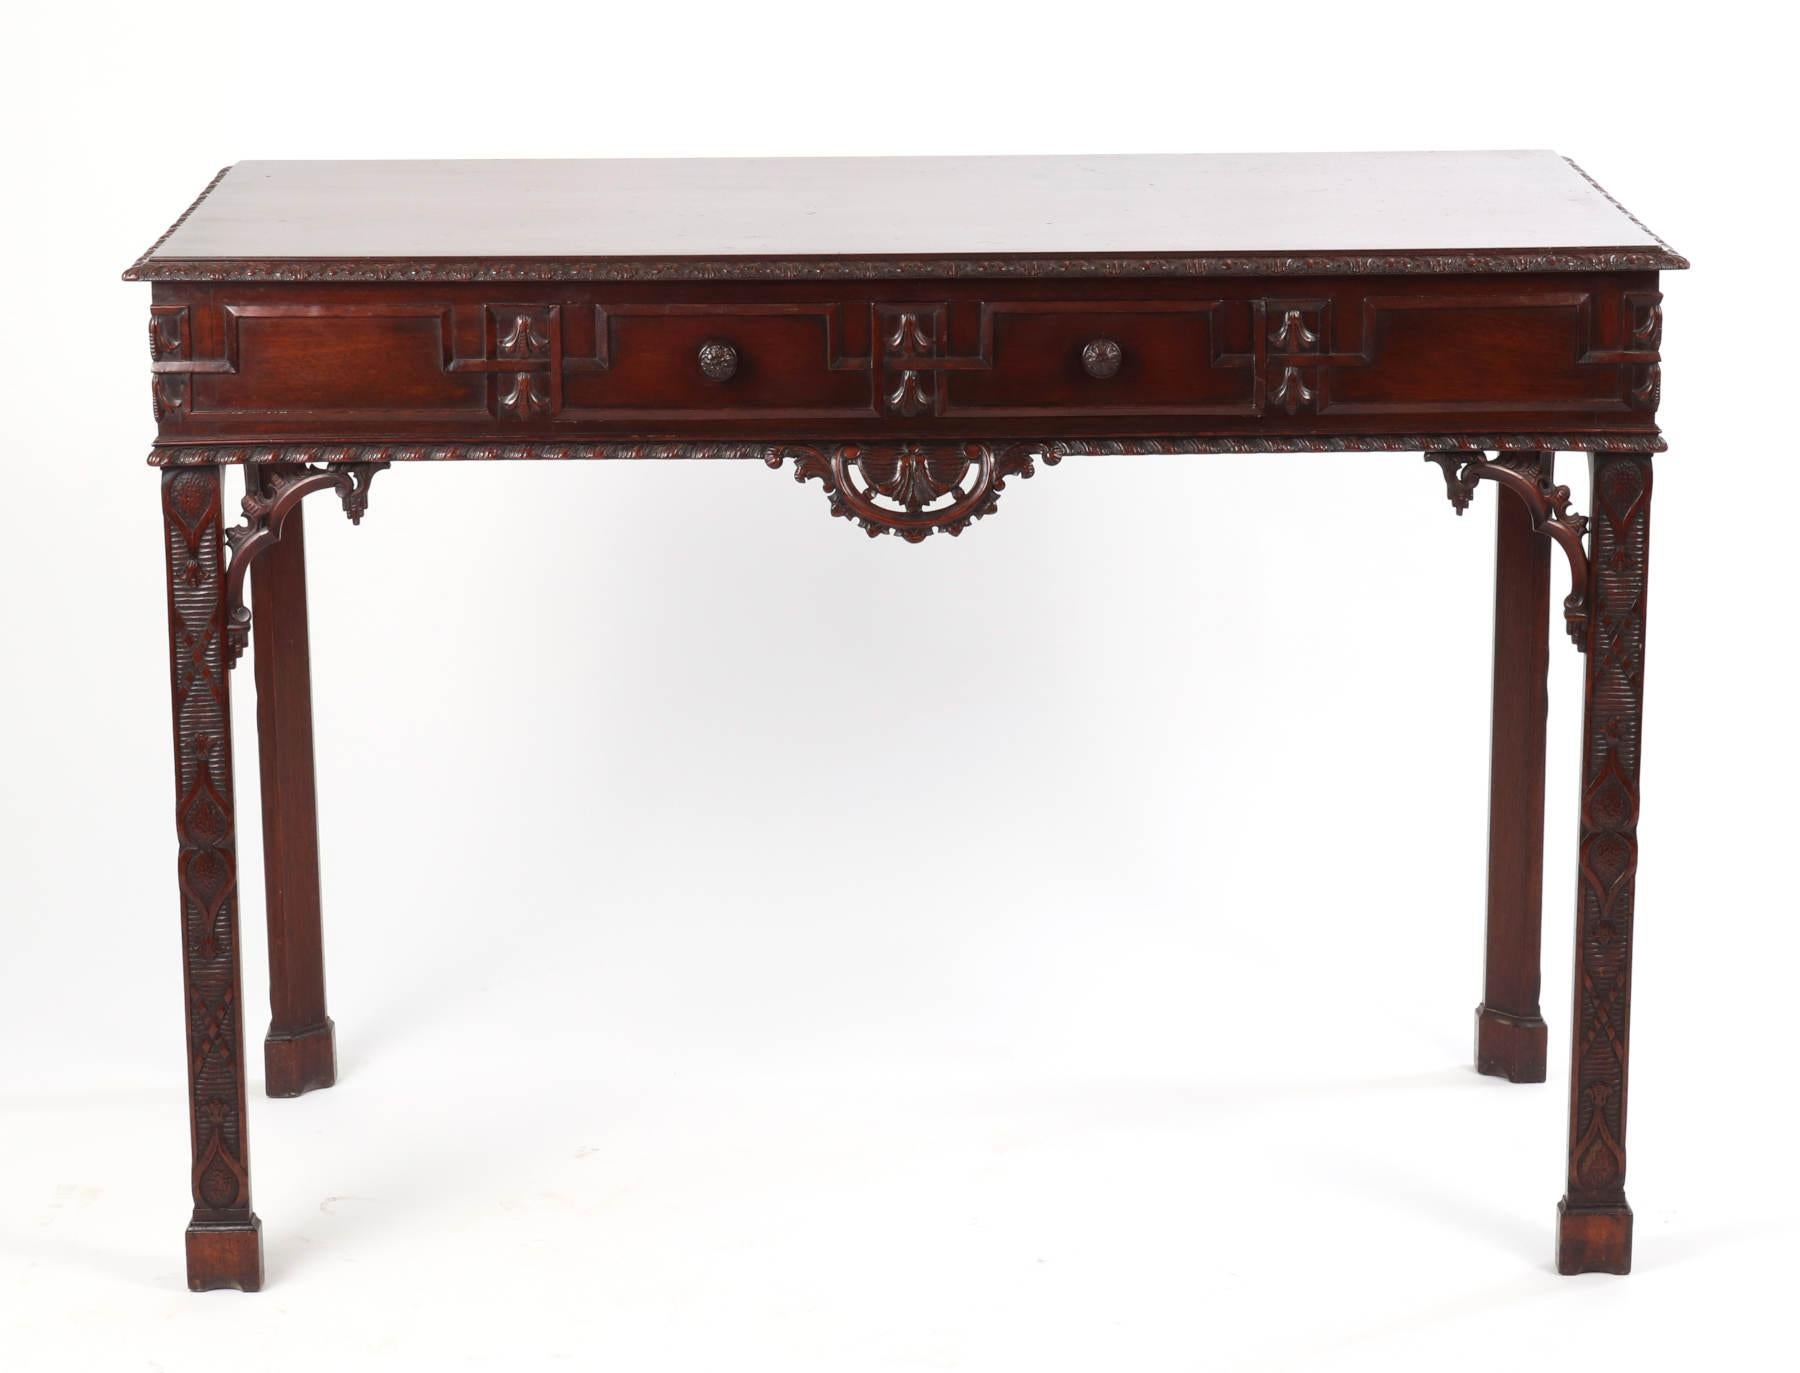 Fine George III mahogany side table, the rectangular top with carved edges over the frieze having a single drawer with carved wooden knobs, the applied fretwork and bellflowers over the gadrooned edge centered by a through carved cartouche, raised